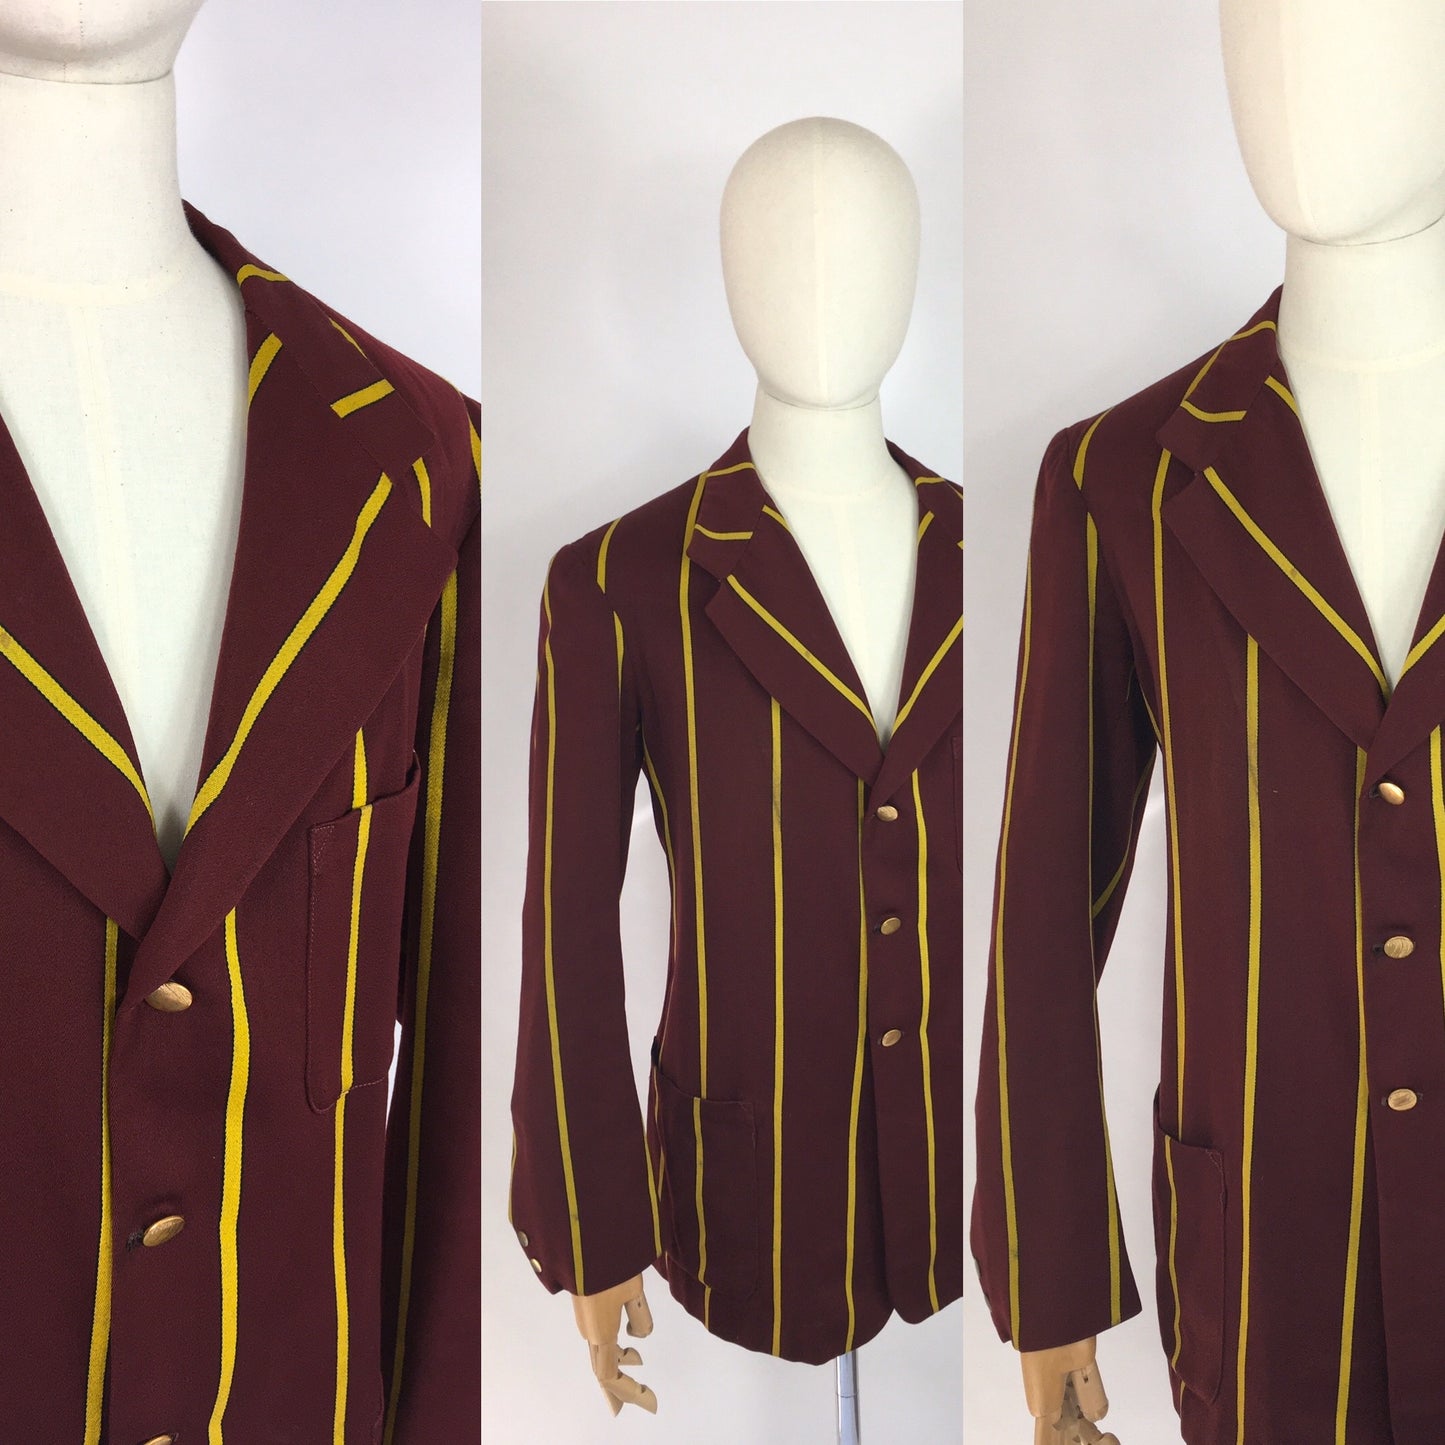 Original College Blazer By ‘ Ryder and Amies Cambridge’ - In a Lovely Burgundy and Yellow Stripe